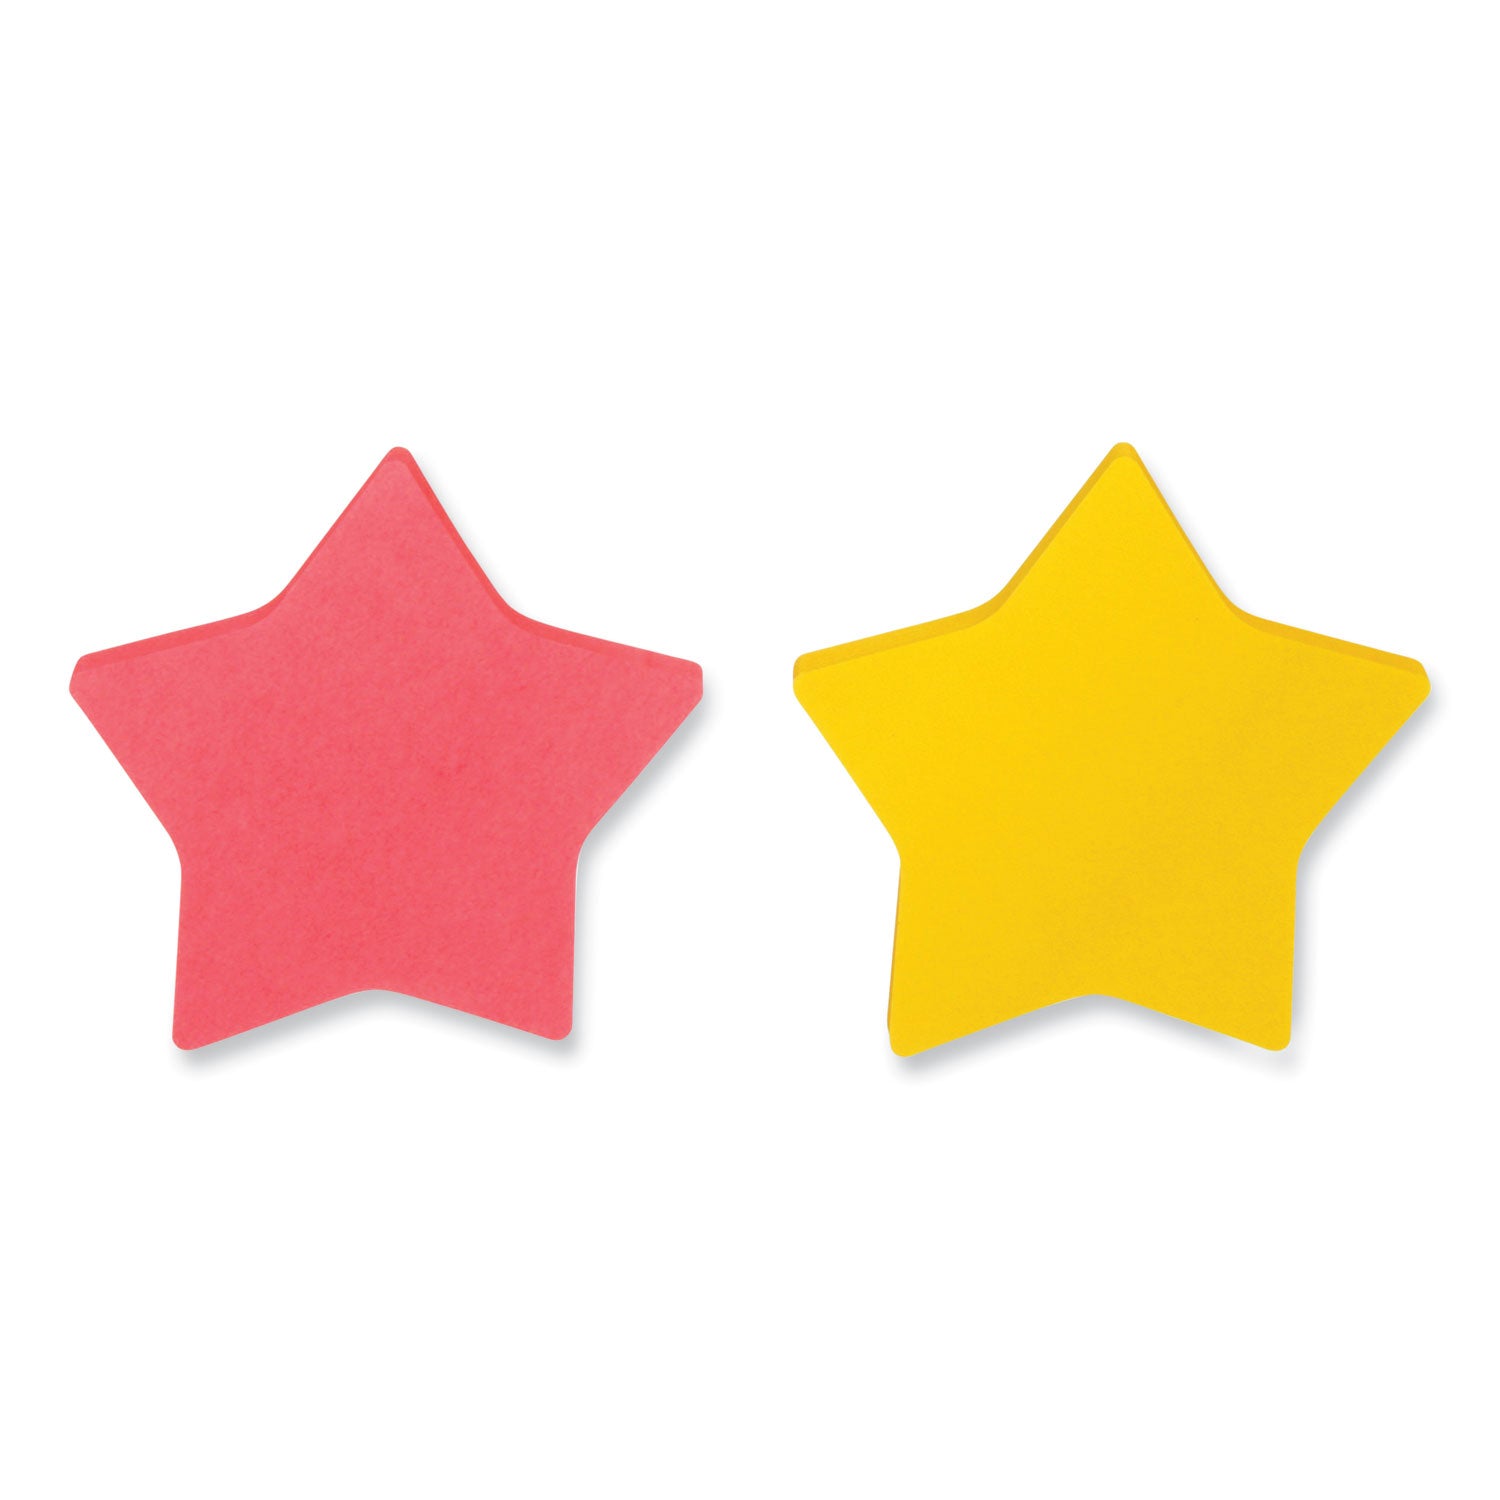 die-cut-star-shaped-notepads-26-x-26-assorted-colors-75-sheets-pad-2-pads-pack_mmm70005114114 - 2